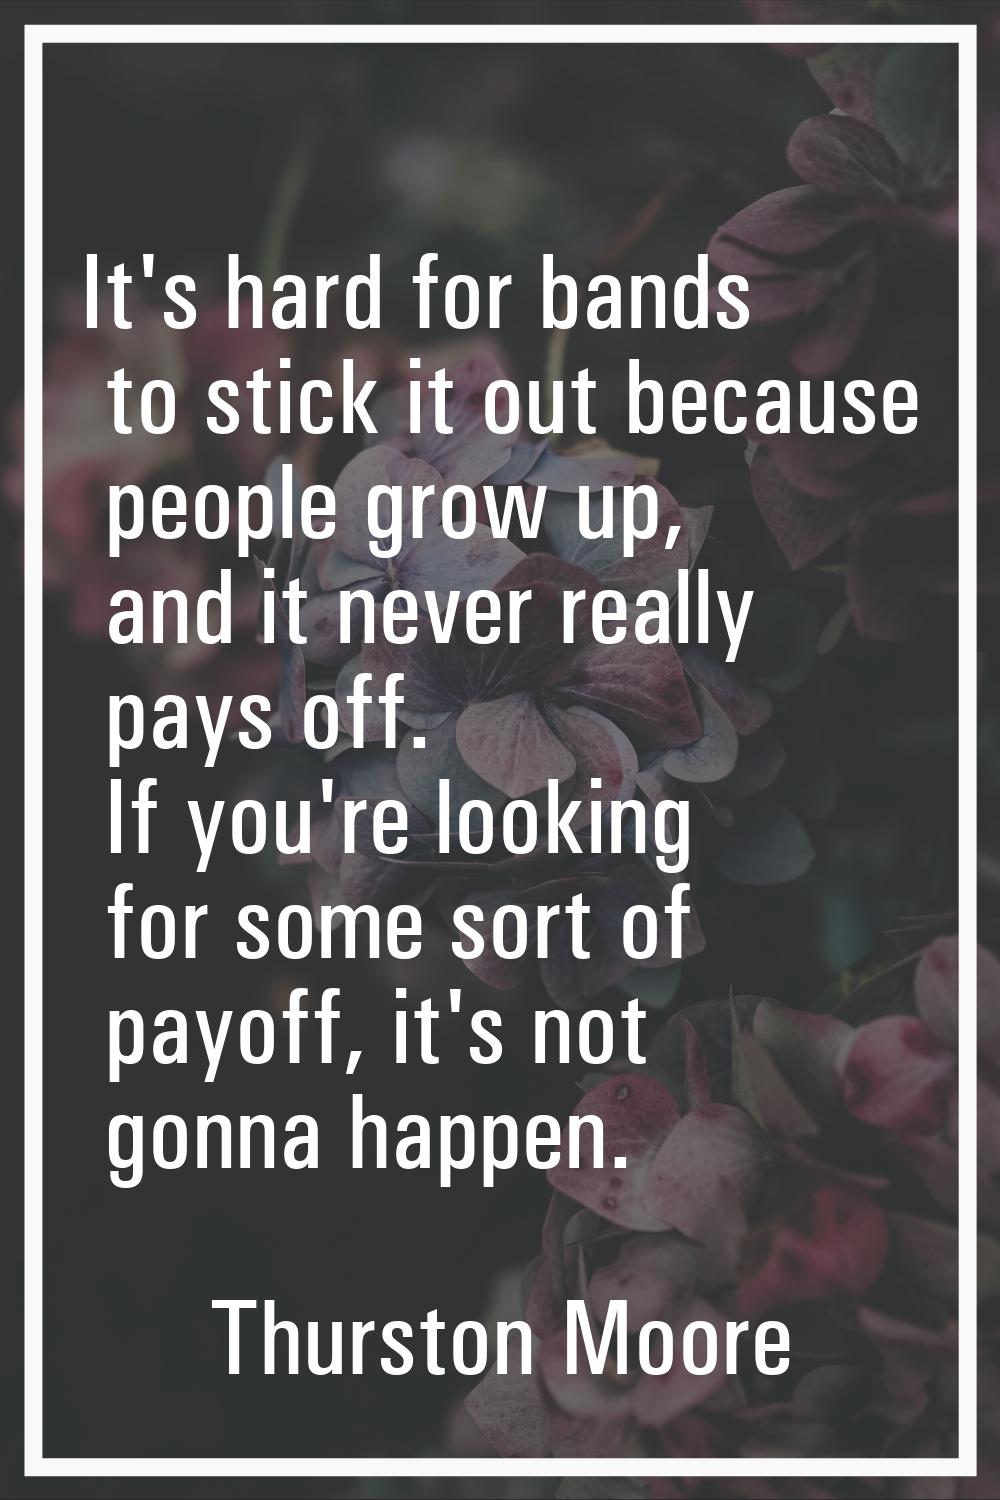 It's hard for bands to stick it out because people grow up, and it never really pays off. If you're